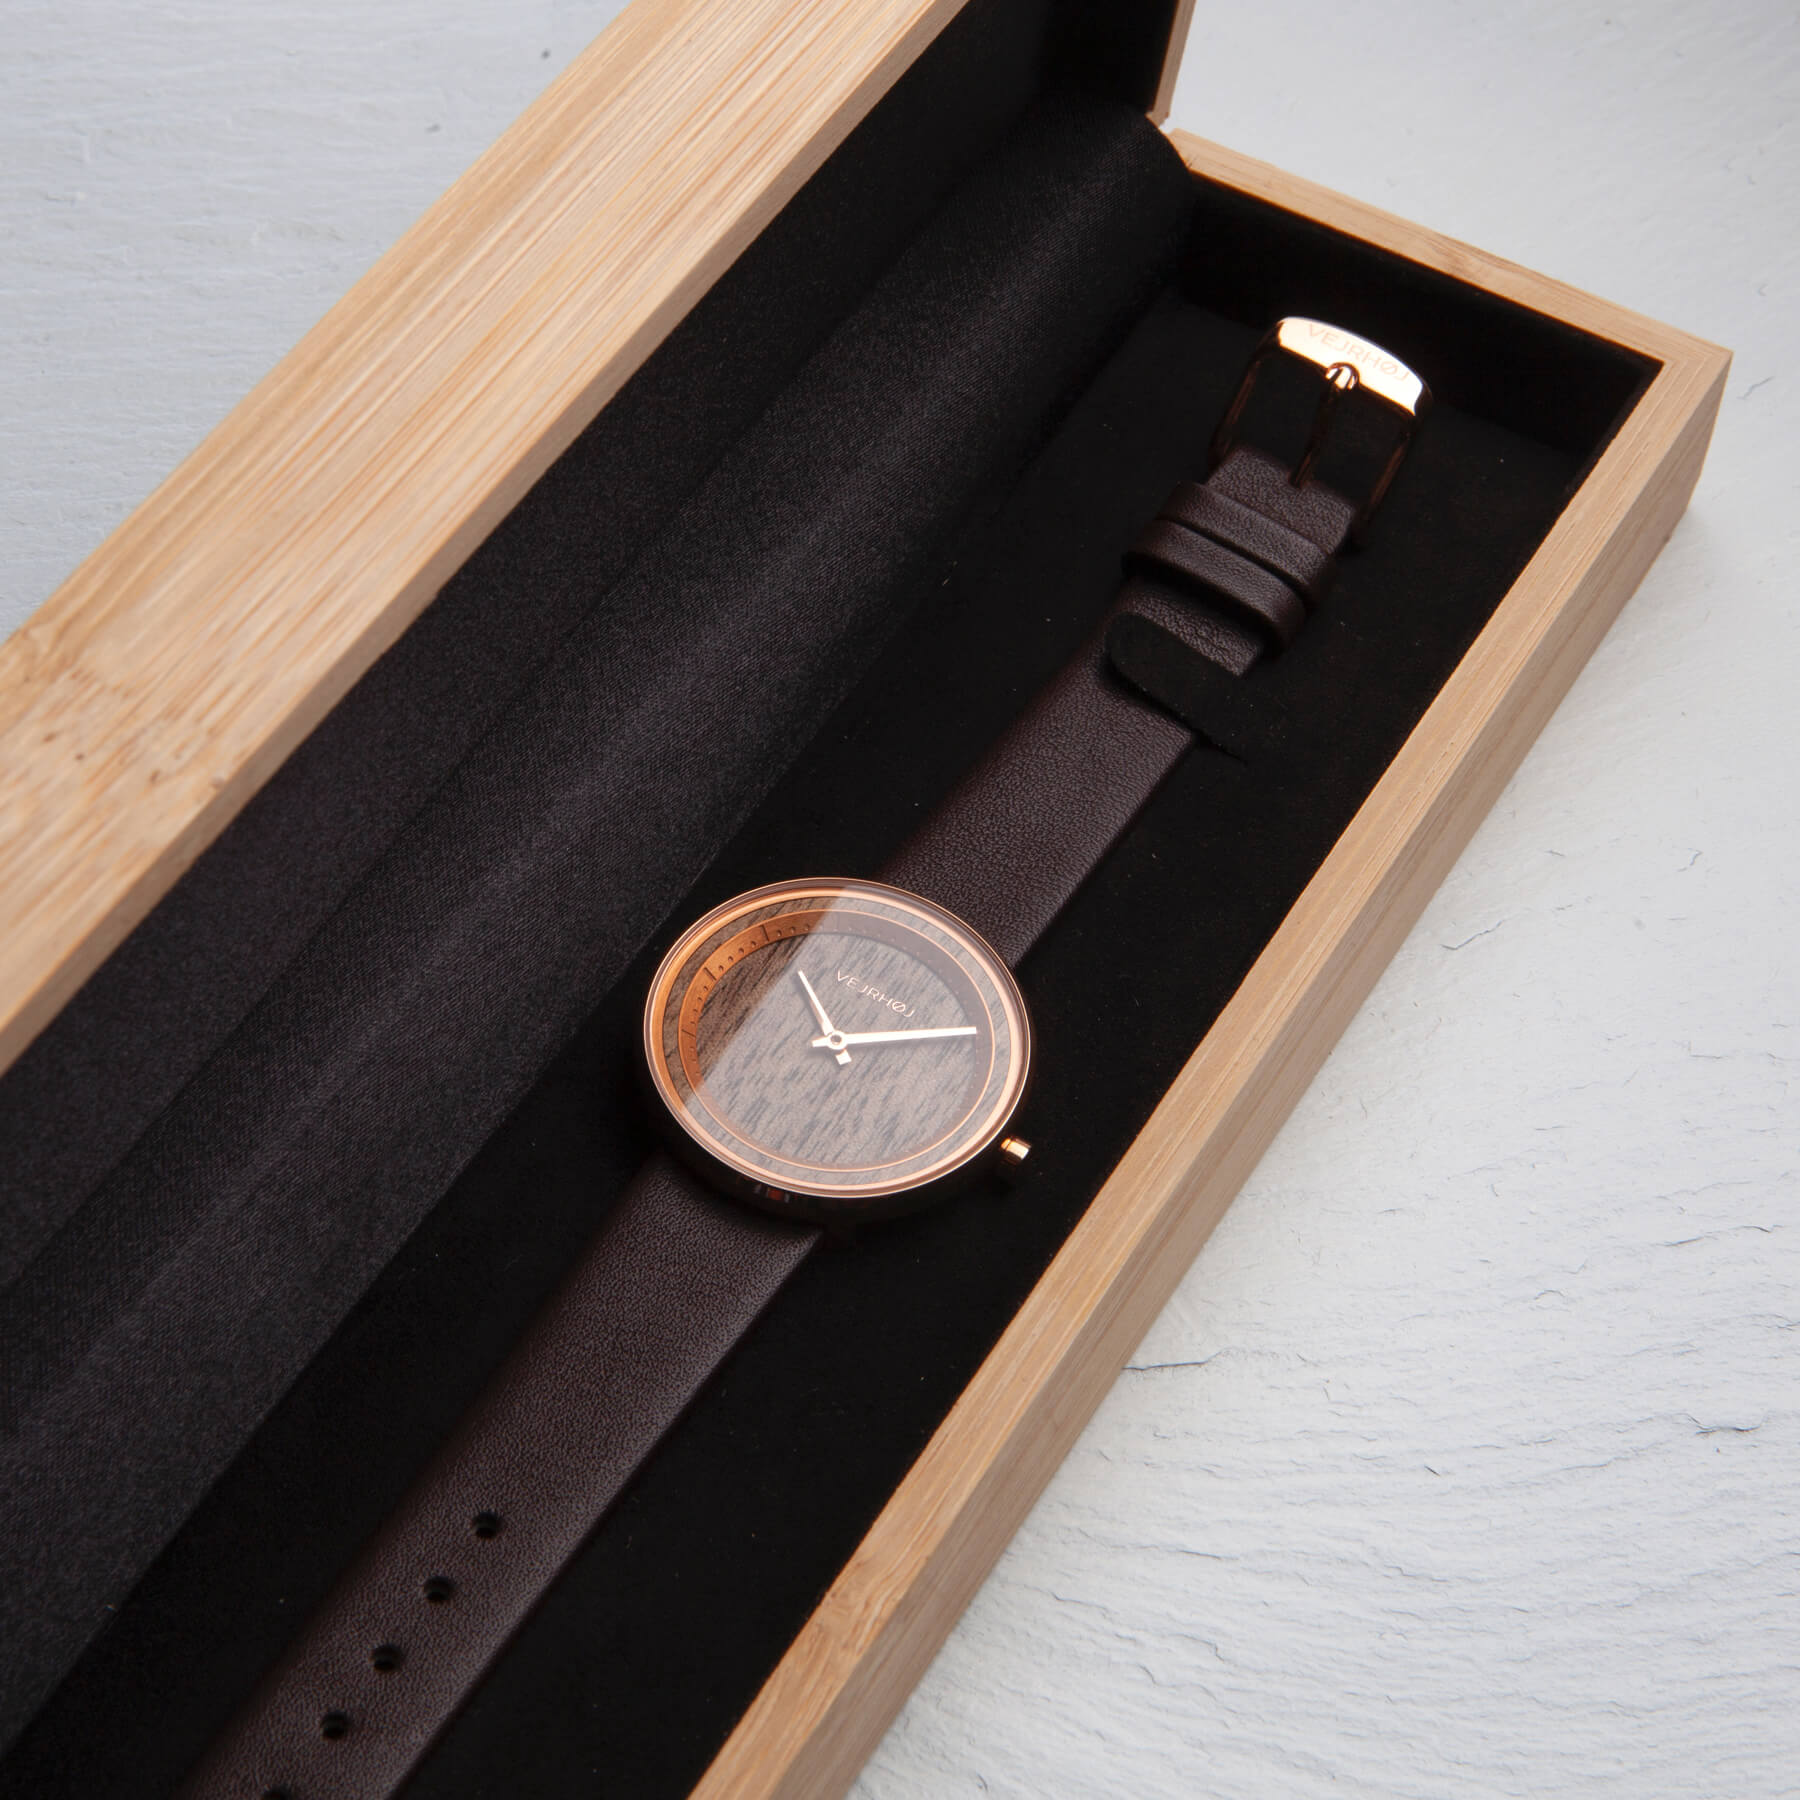 Elegant Wooden watch for women placed in a wooden box